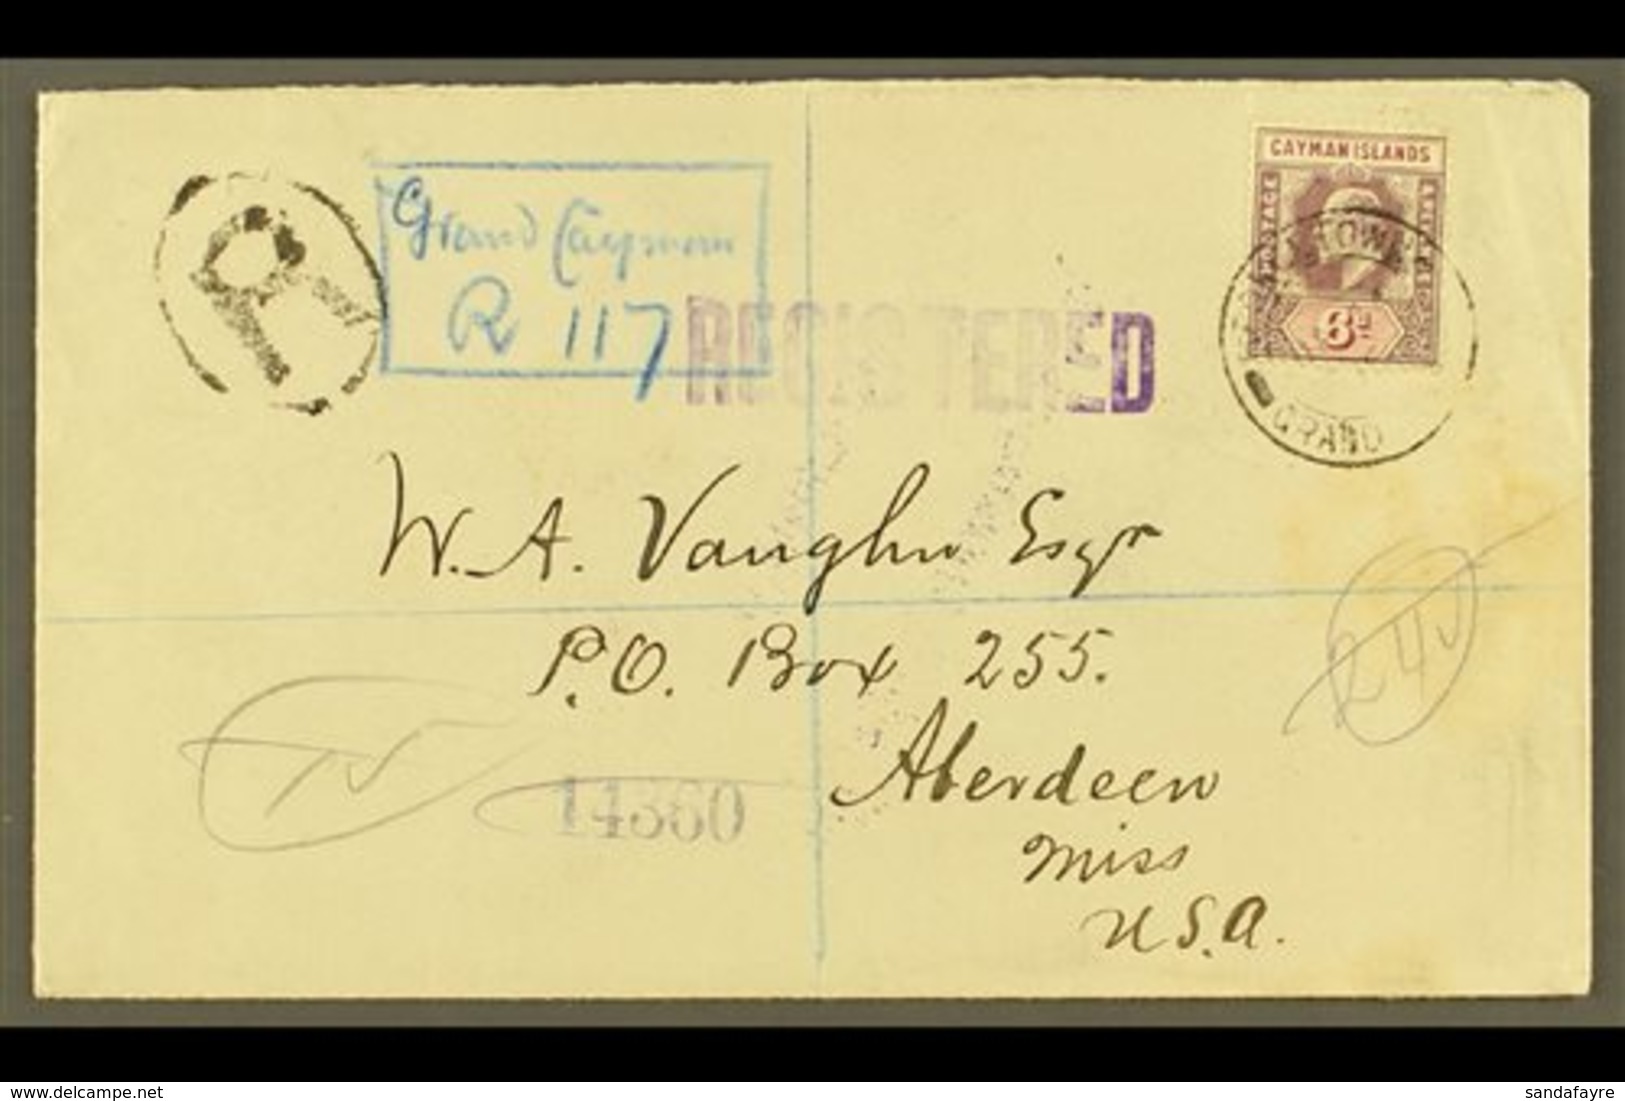 1916  (24 Jan) Registered Cover To USA, Bearing 1907-09 6d Stamp (SG 30) Tied By "George Town" Cds, With Registration Ca - Kaimaninseln